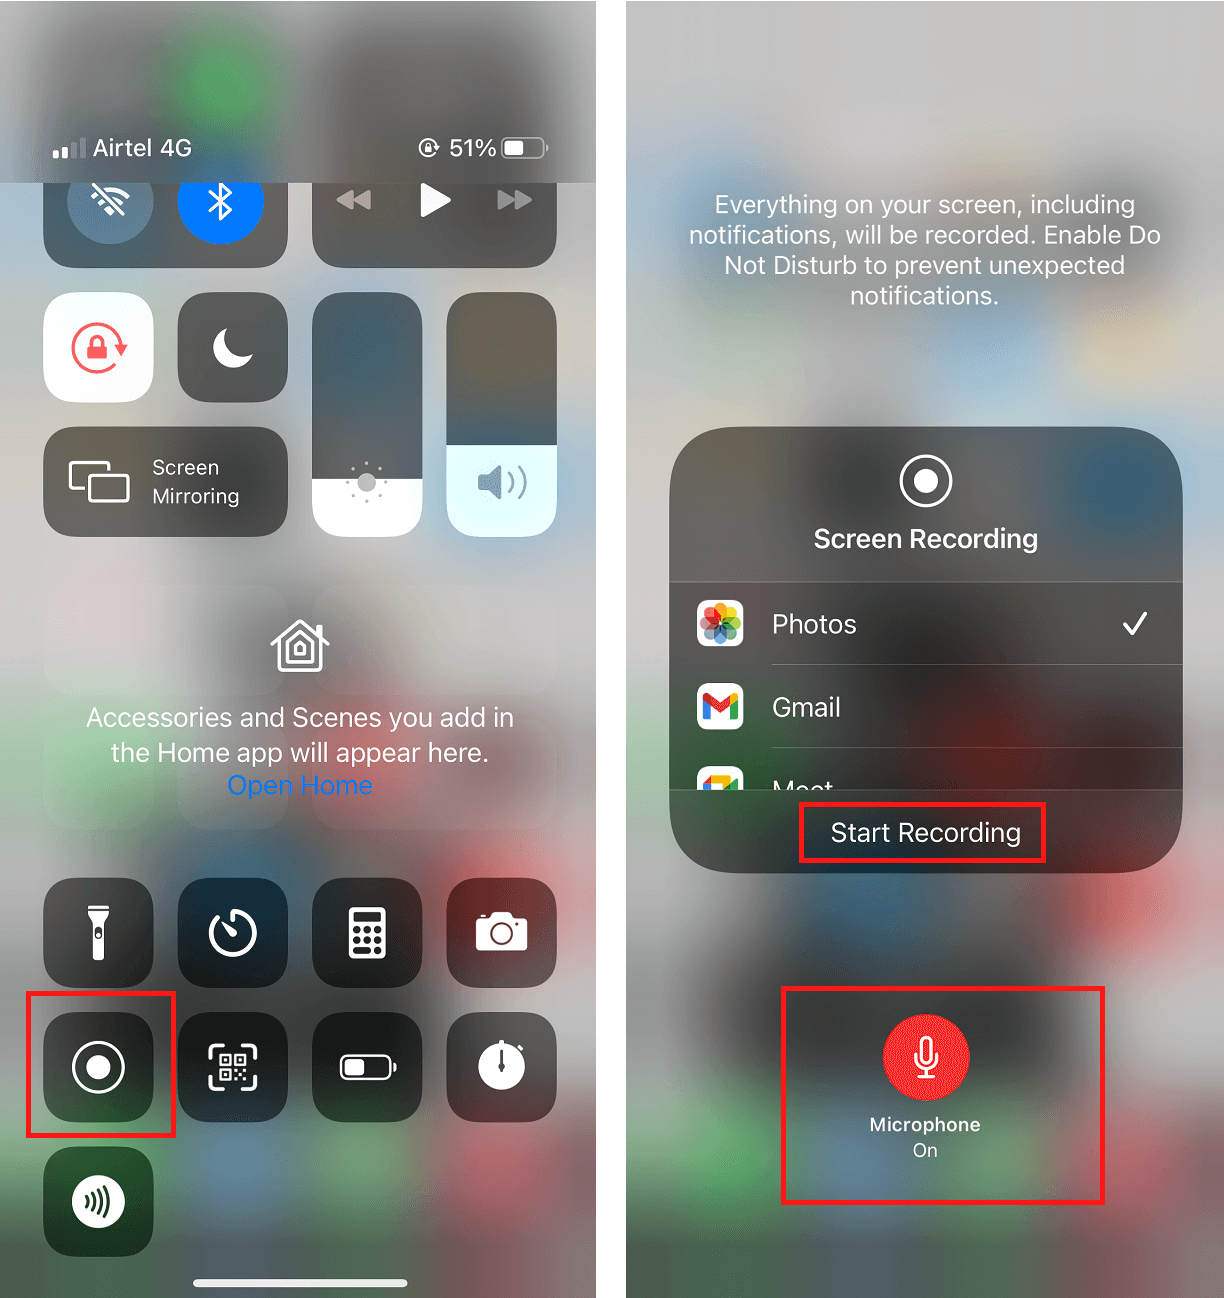 Open the Control Centre and long-press the Record button to start the screen recording